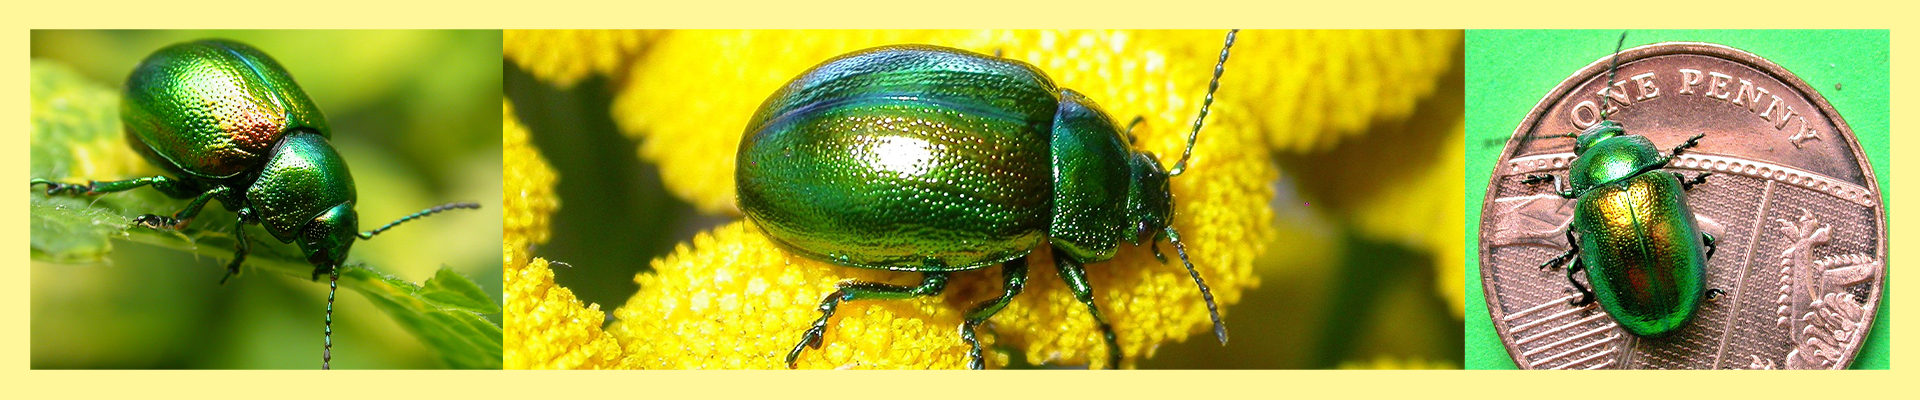 3 close up images of the Tansy Beetle